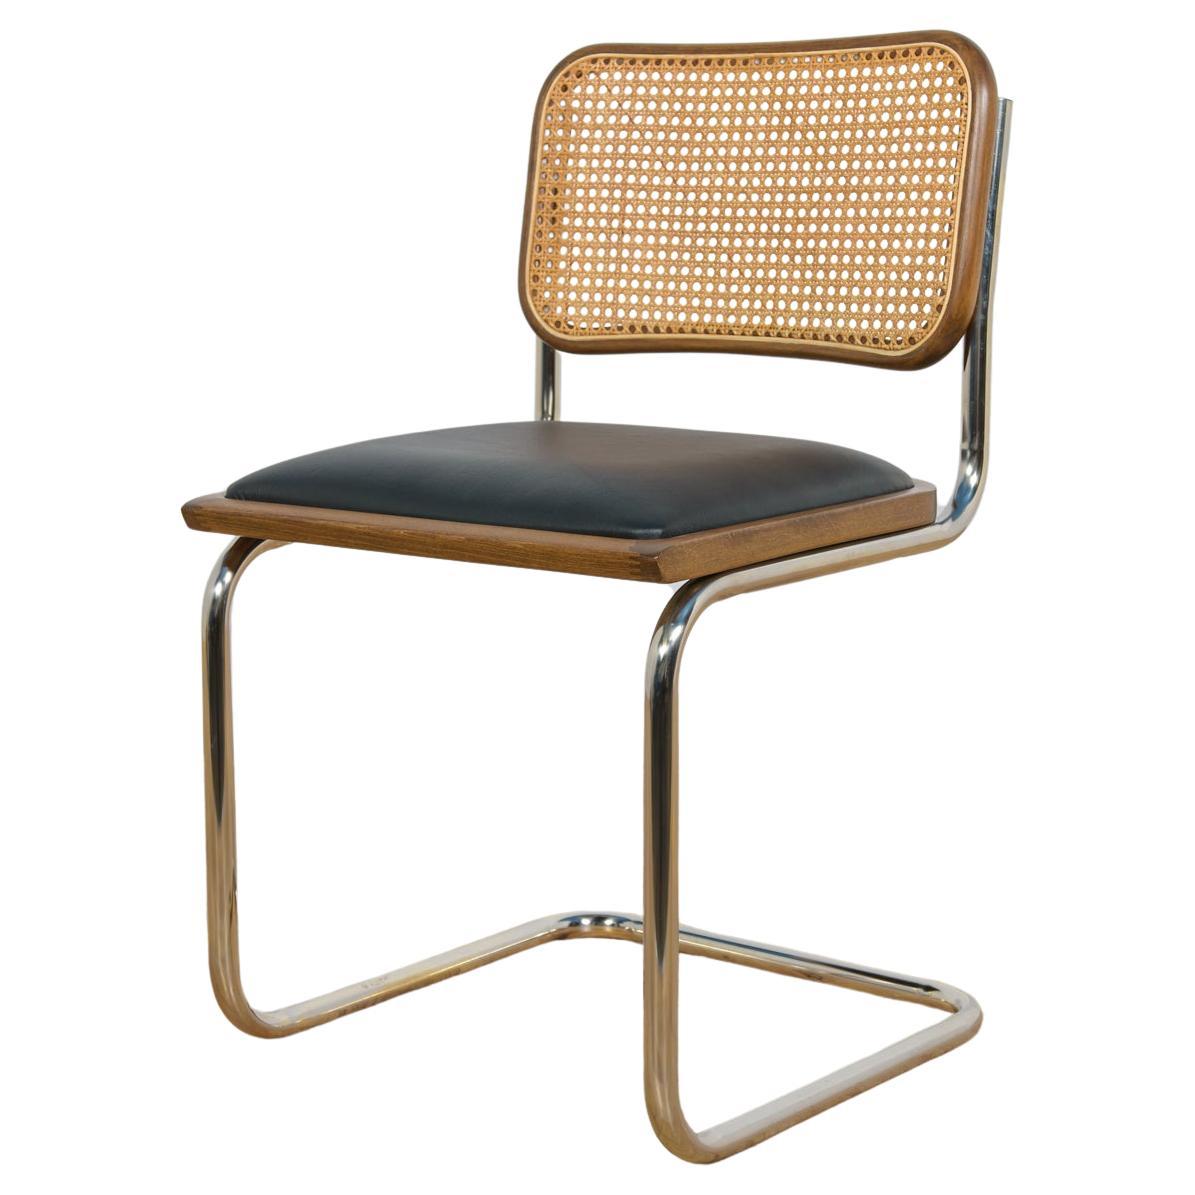 Chrome-Plated Chair Type Cesca, Italy, 1980s